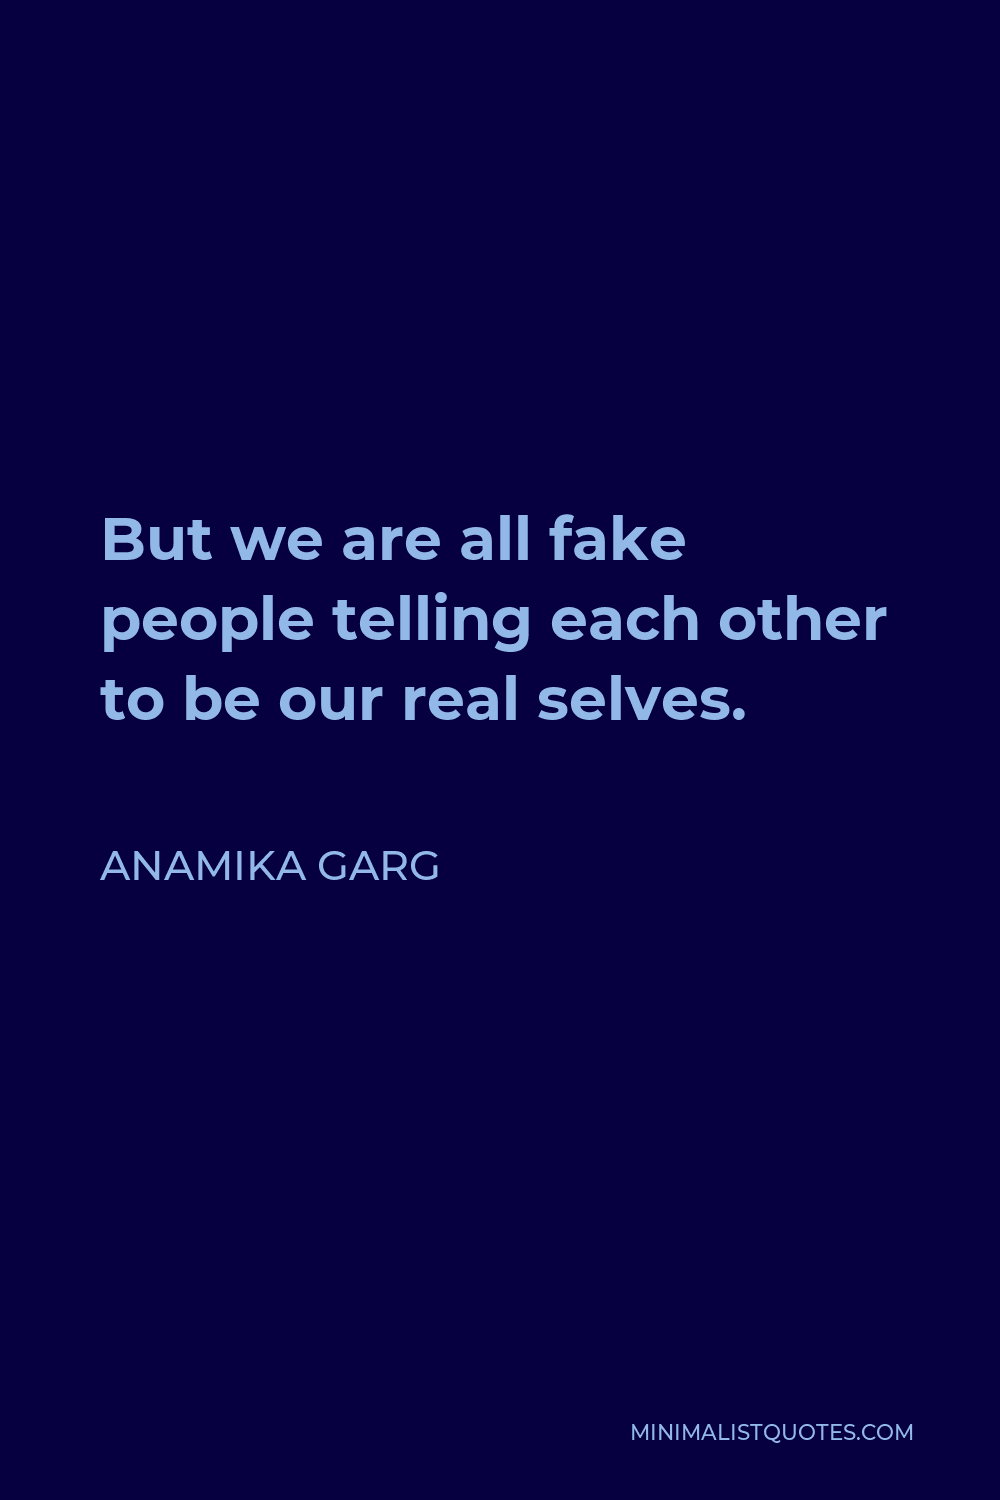 Anamika Garg Quote - But we are all fake people telling each other to be our real selves.